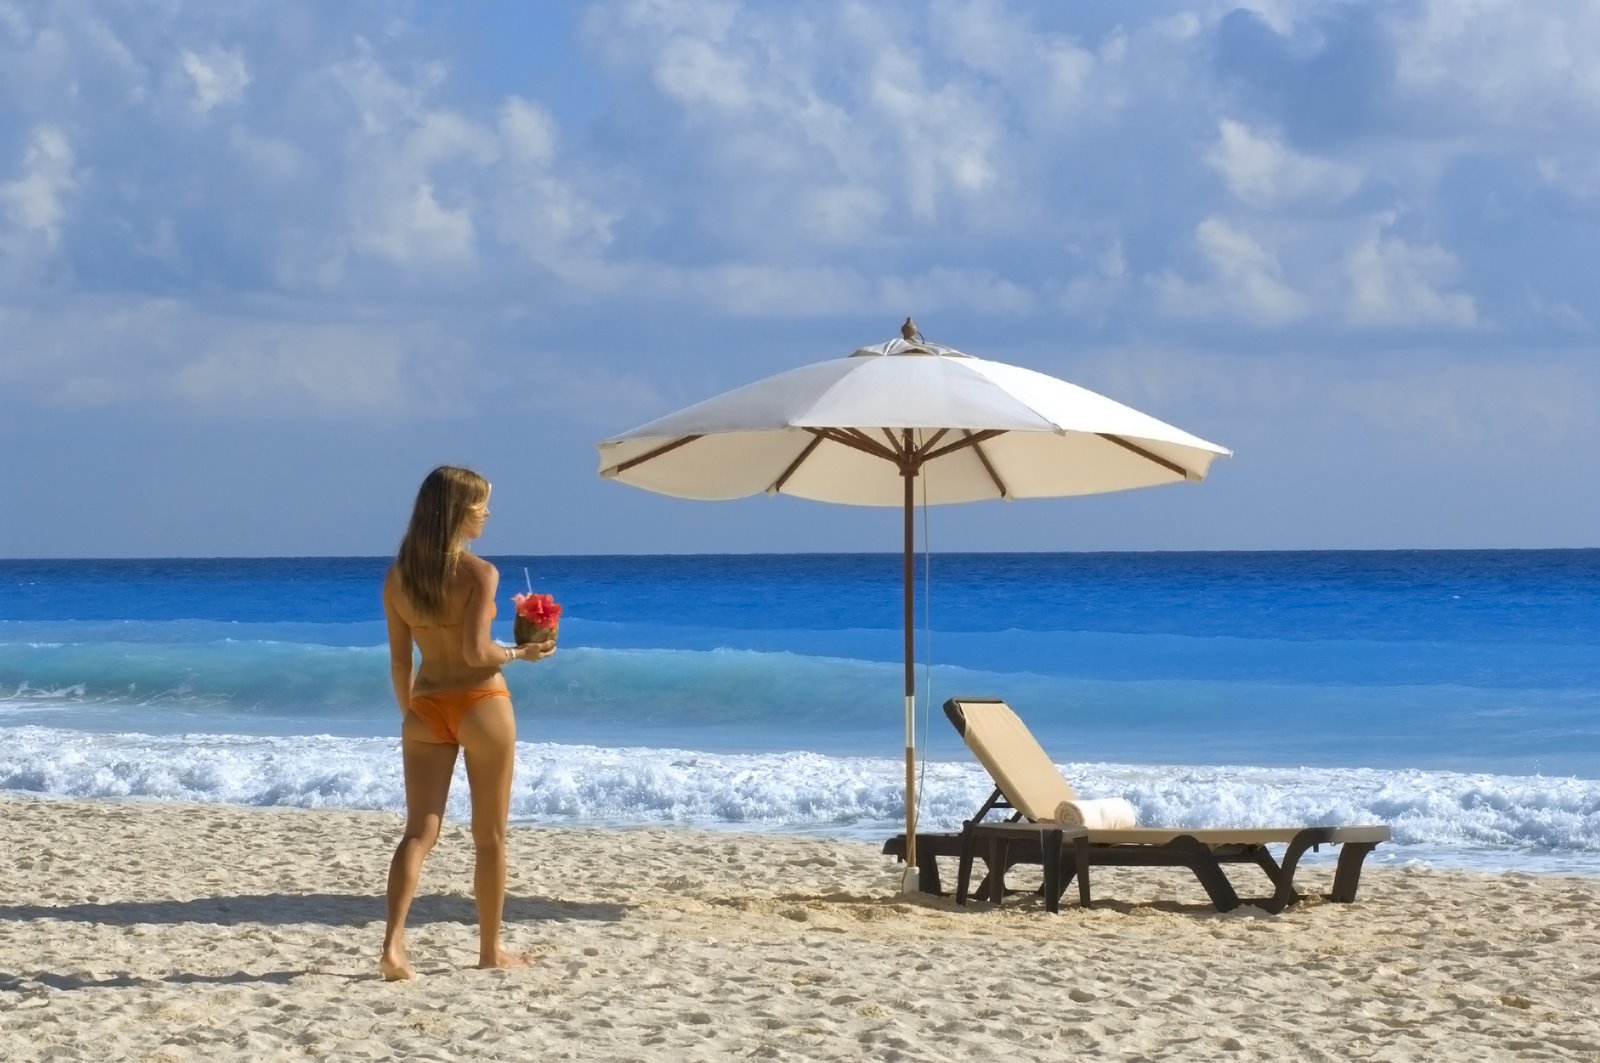 Exotic Vacations for Singles: Vacationing in Mexico